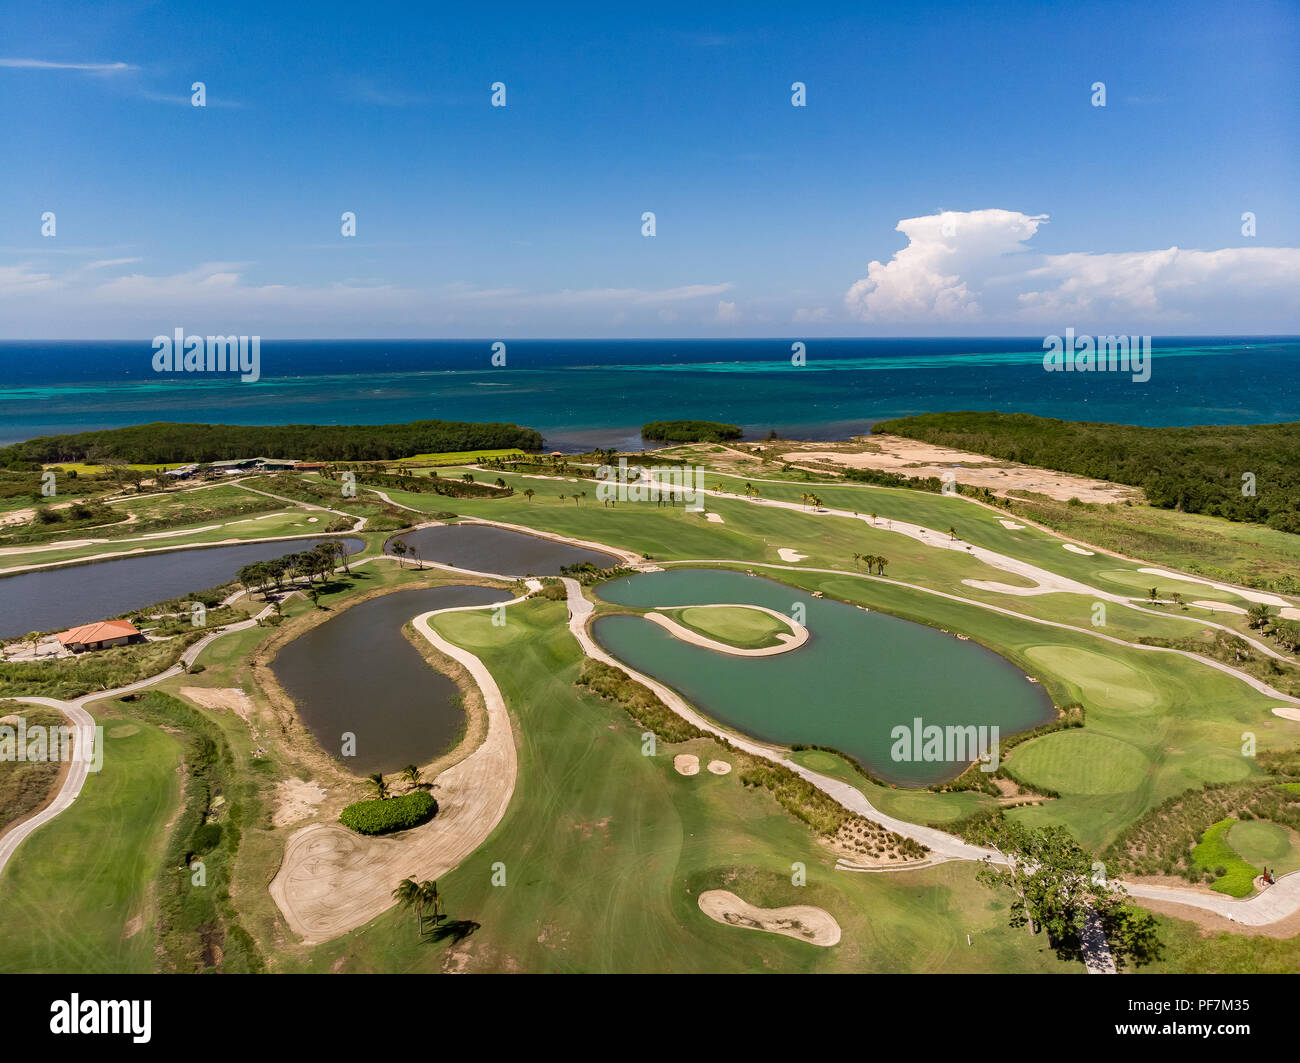 Aerial View of Tropical Golf Course with Ocean Background Stock Photo